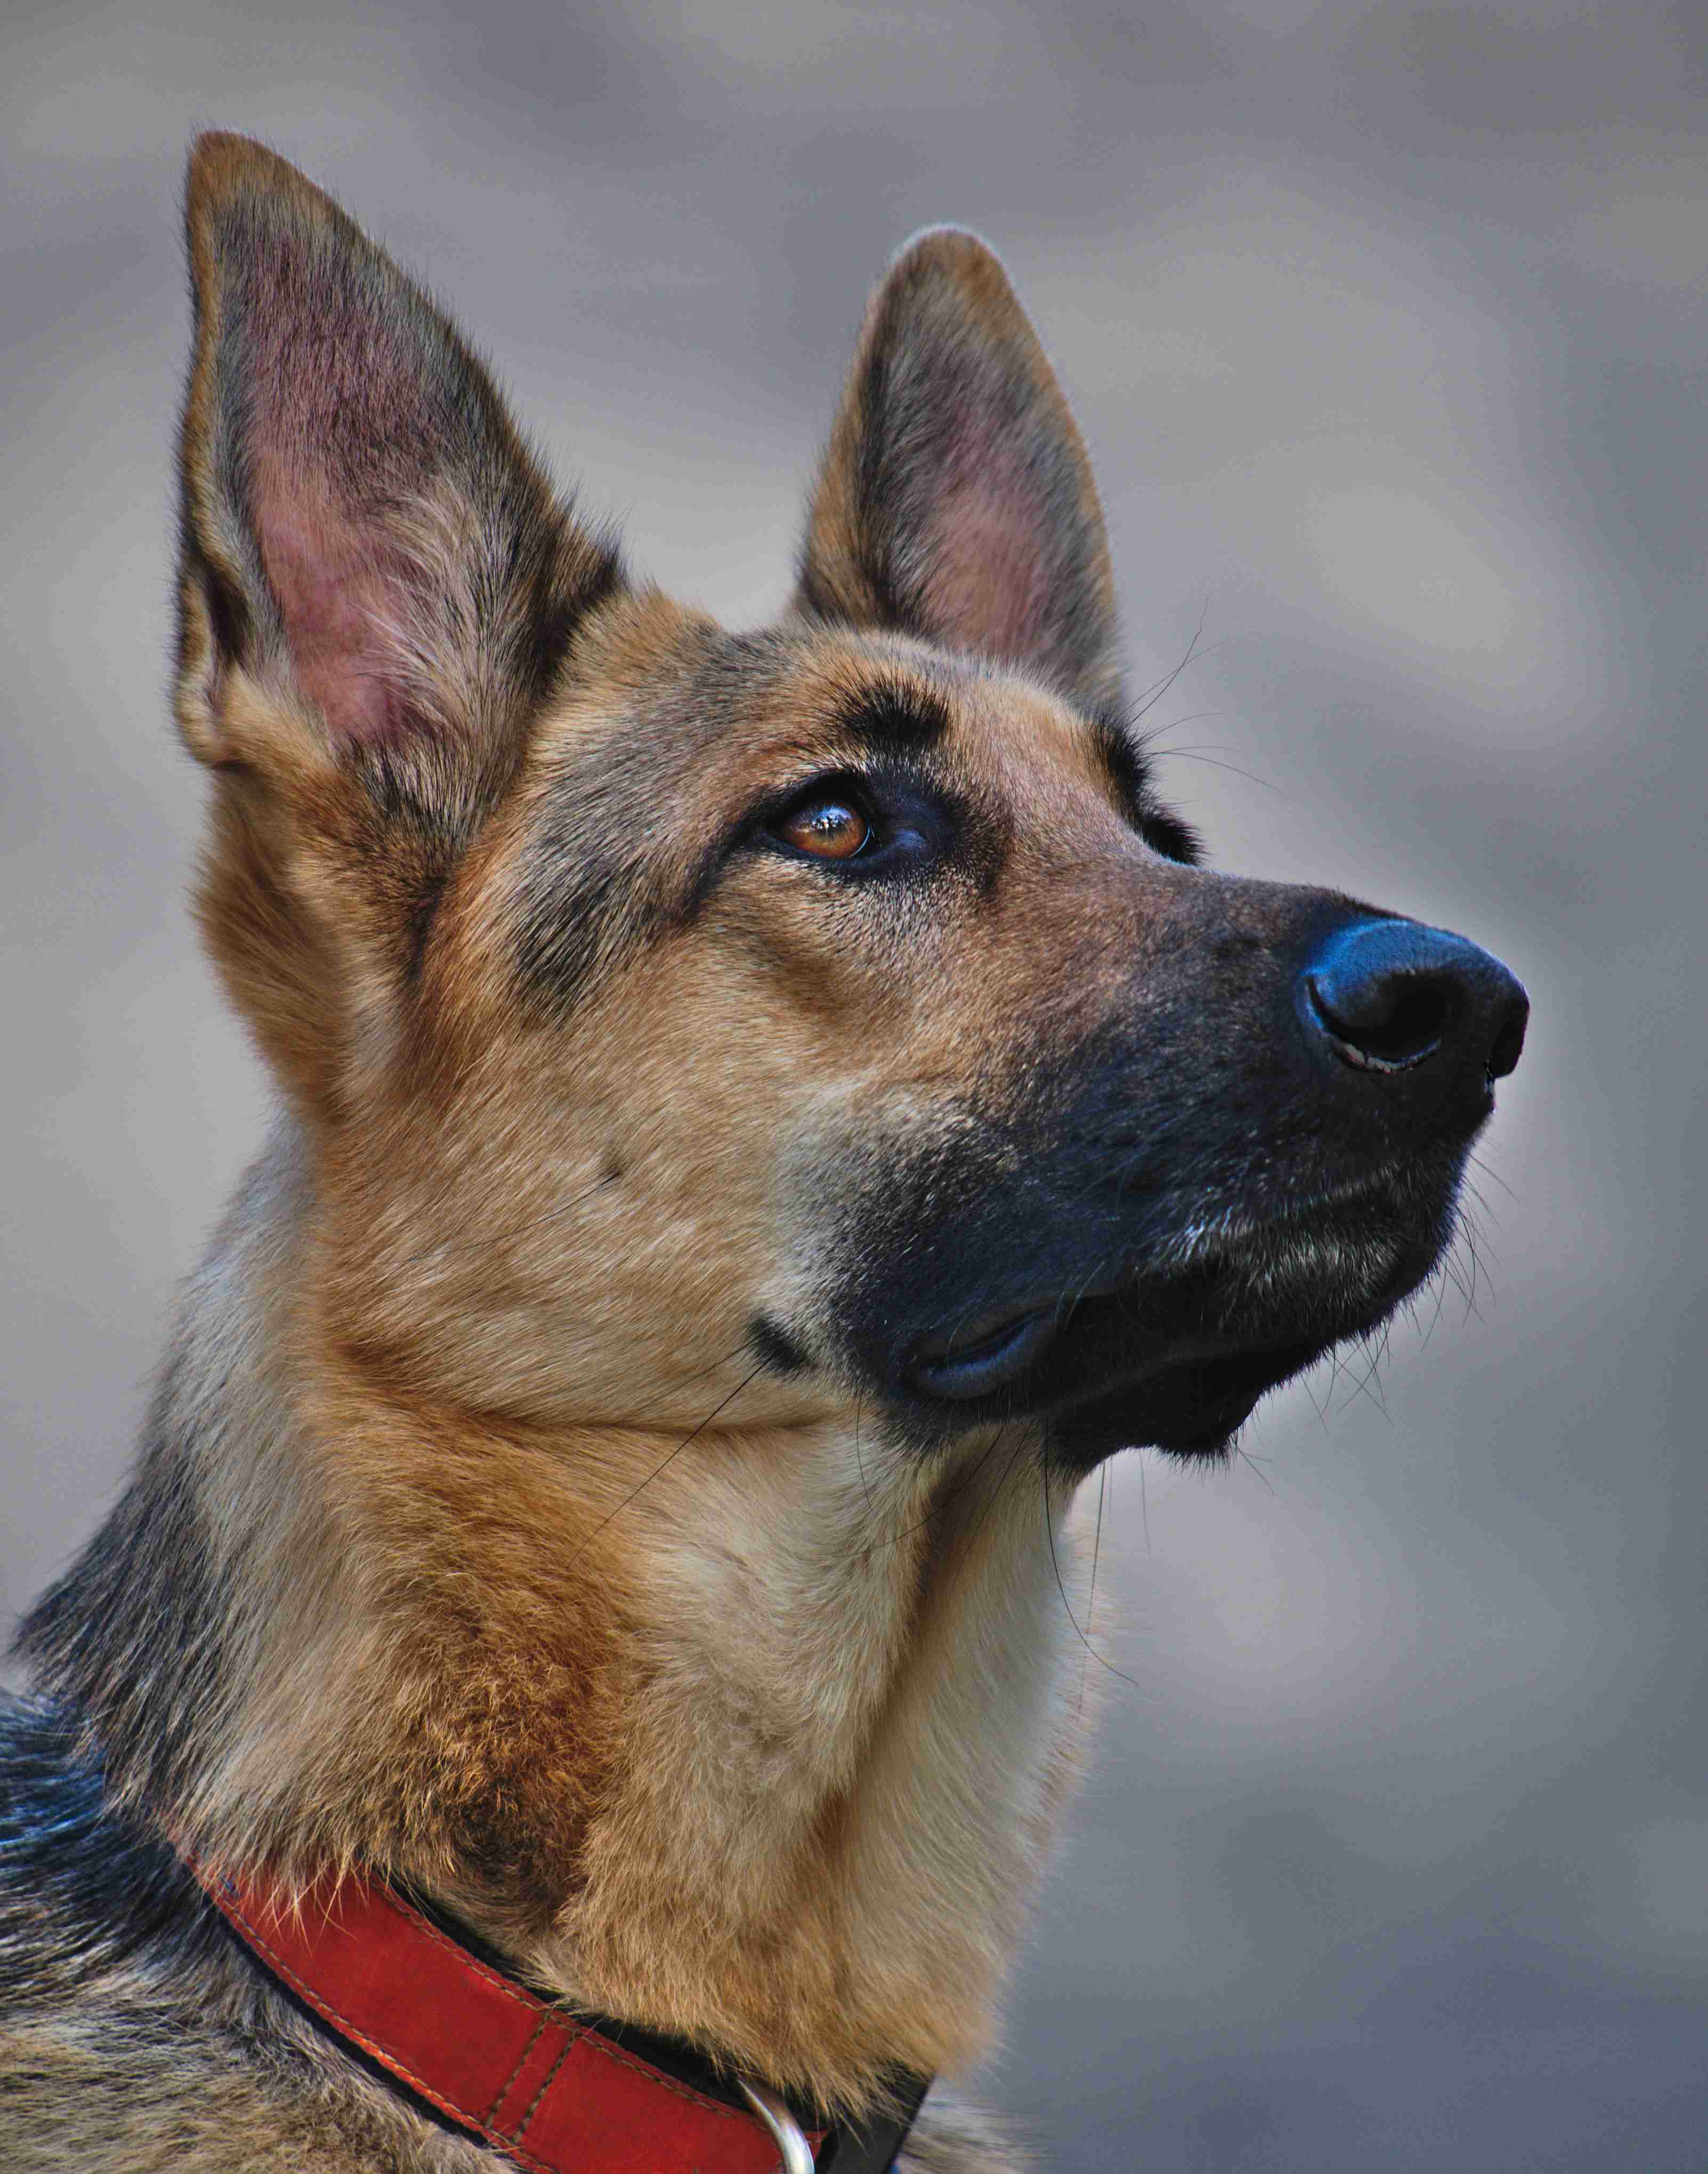 How do you prevent ear mites in a German shepherd?